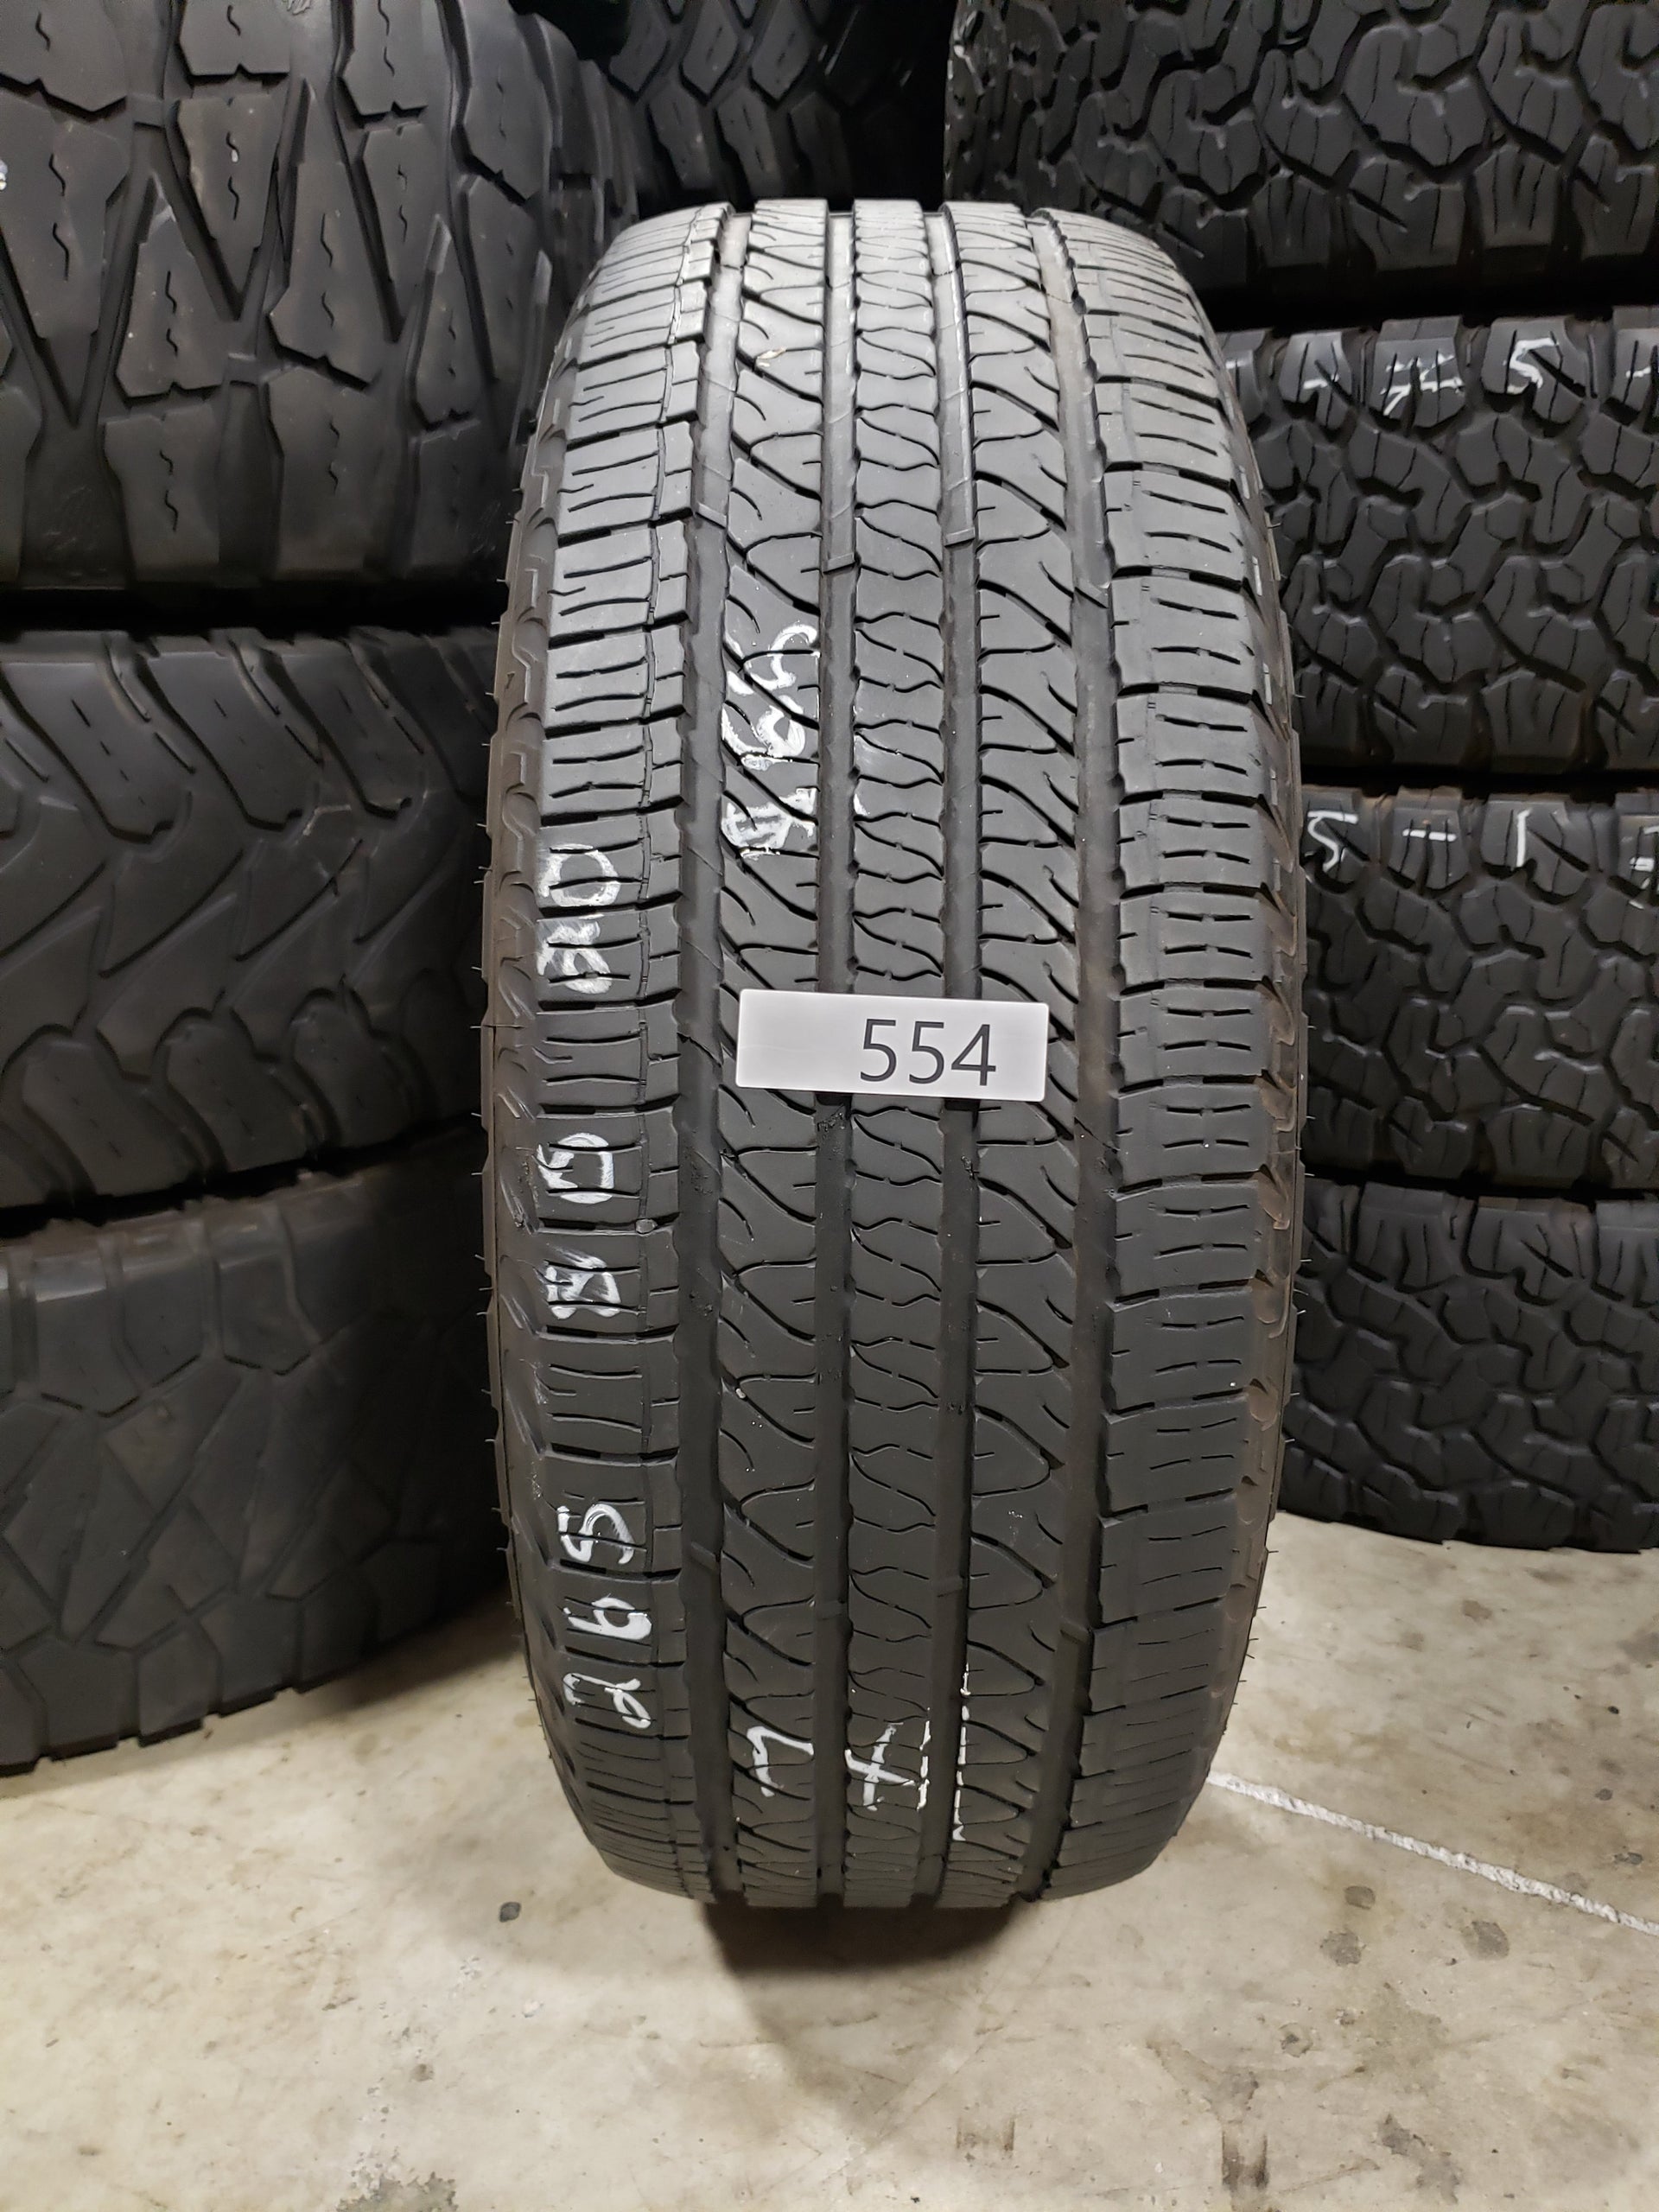 SINGLE 245/50R20 Goodyear Fortera HL 107 T SL - Used Tires – High Tread  Used Tires